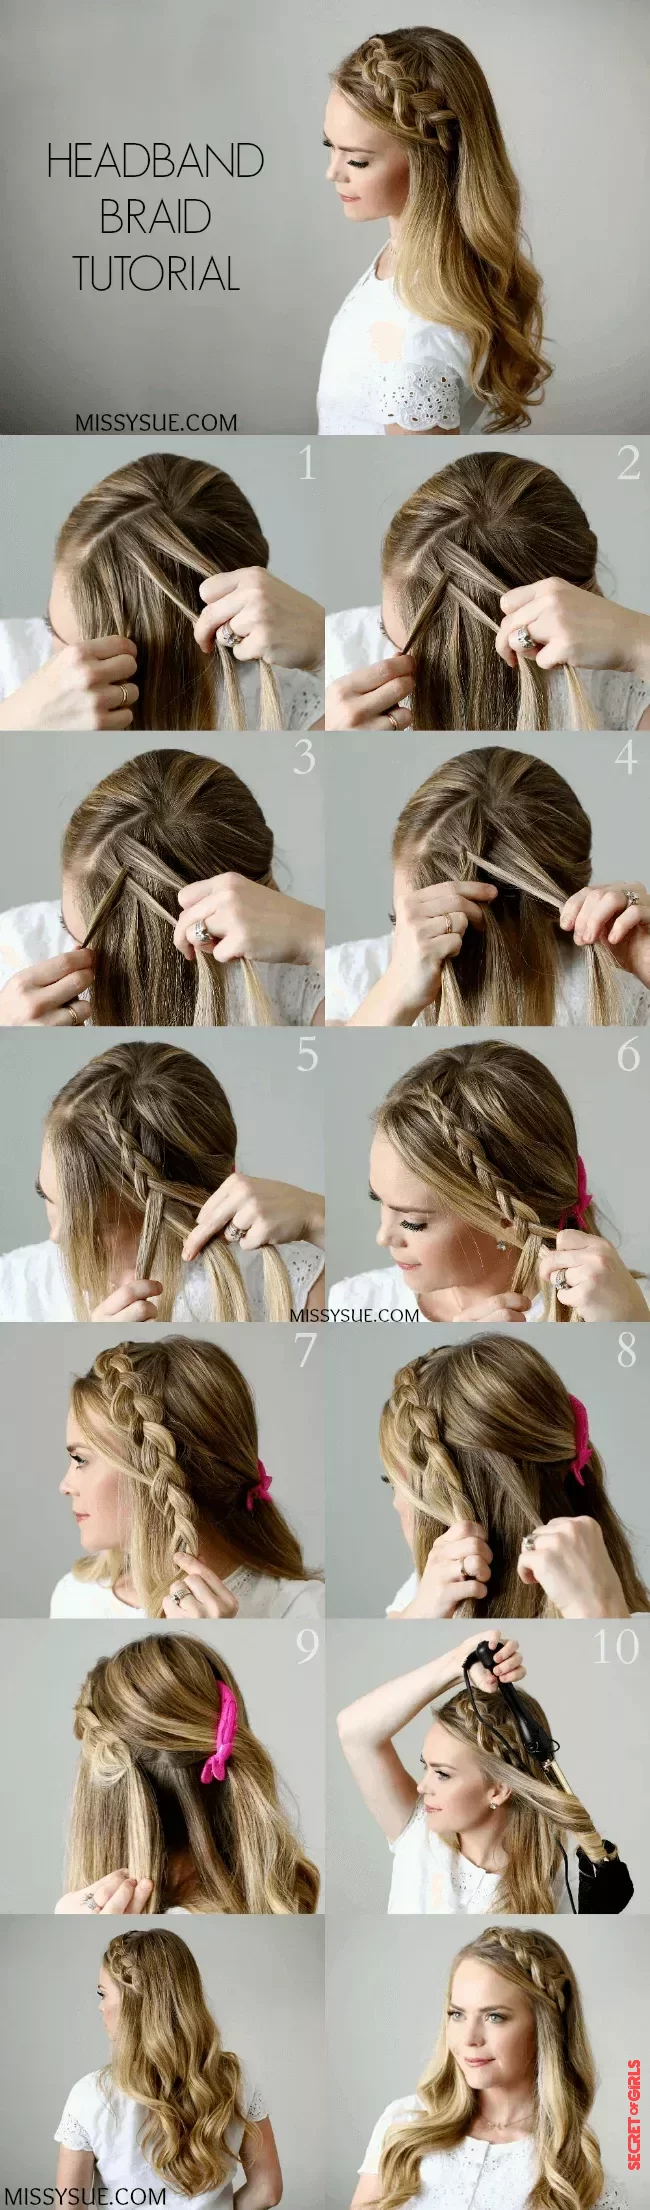 Half crown braid | 8 Braid Hairstyles Ideas And Our Tips For Success